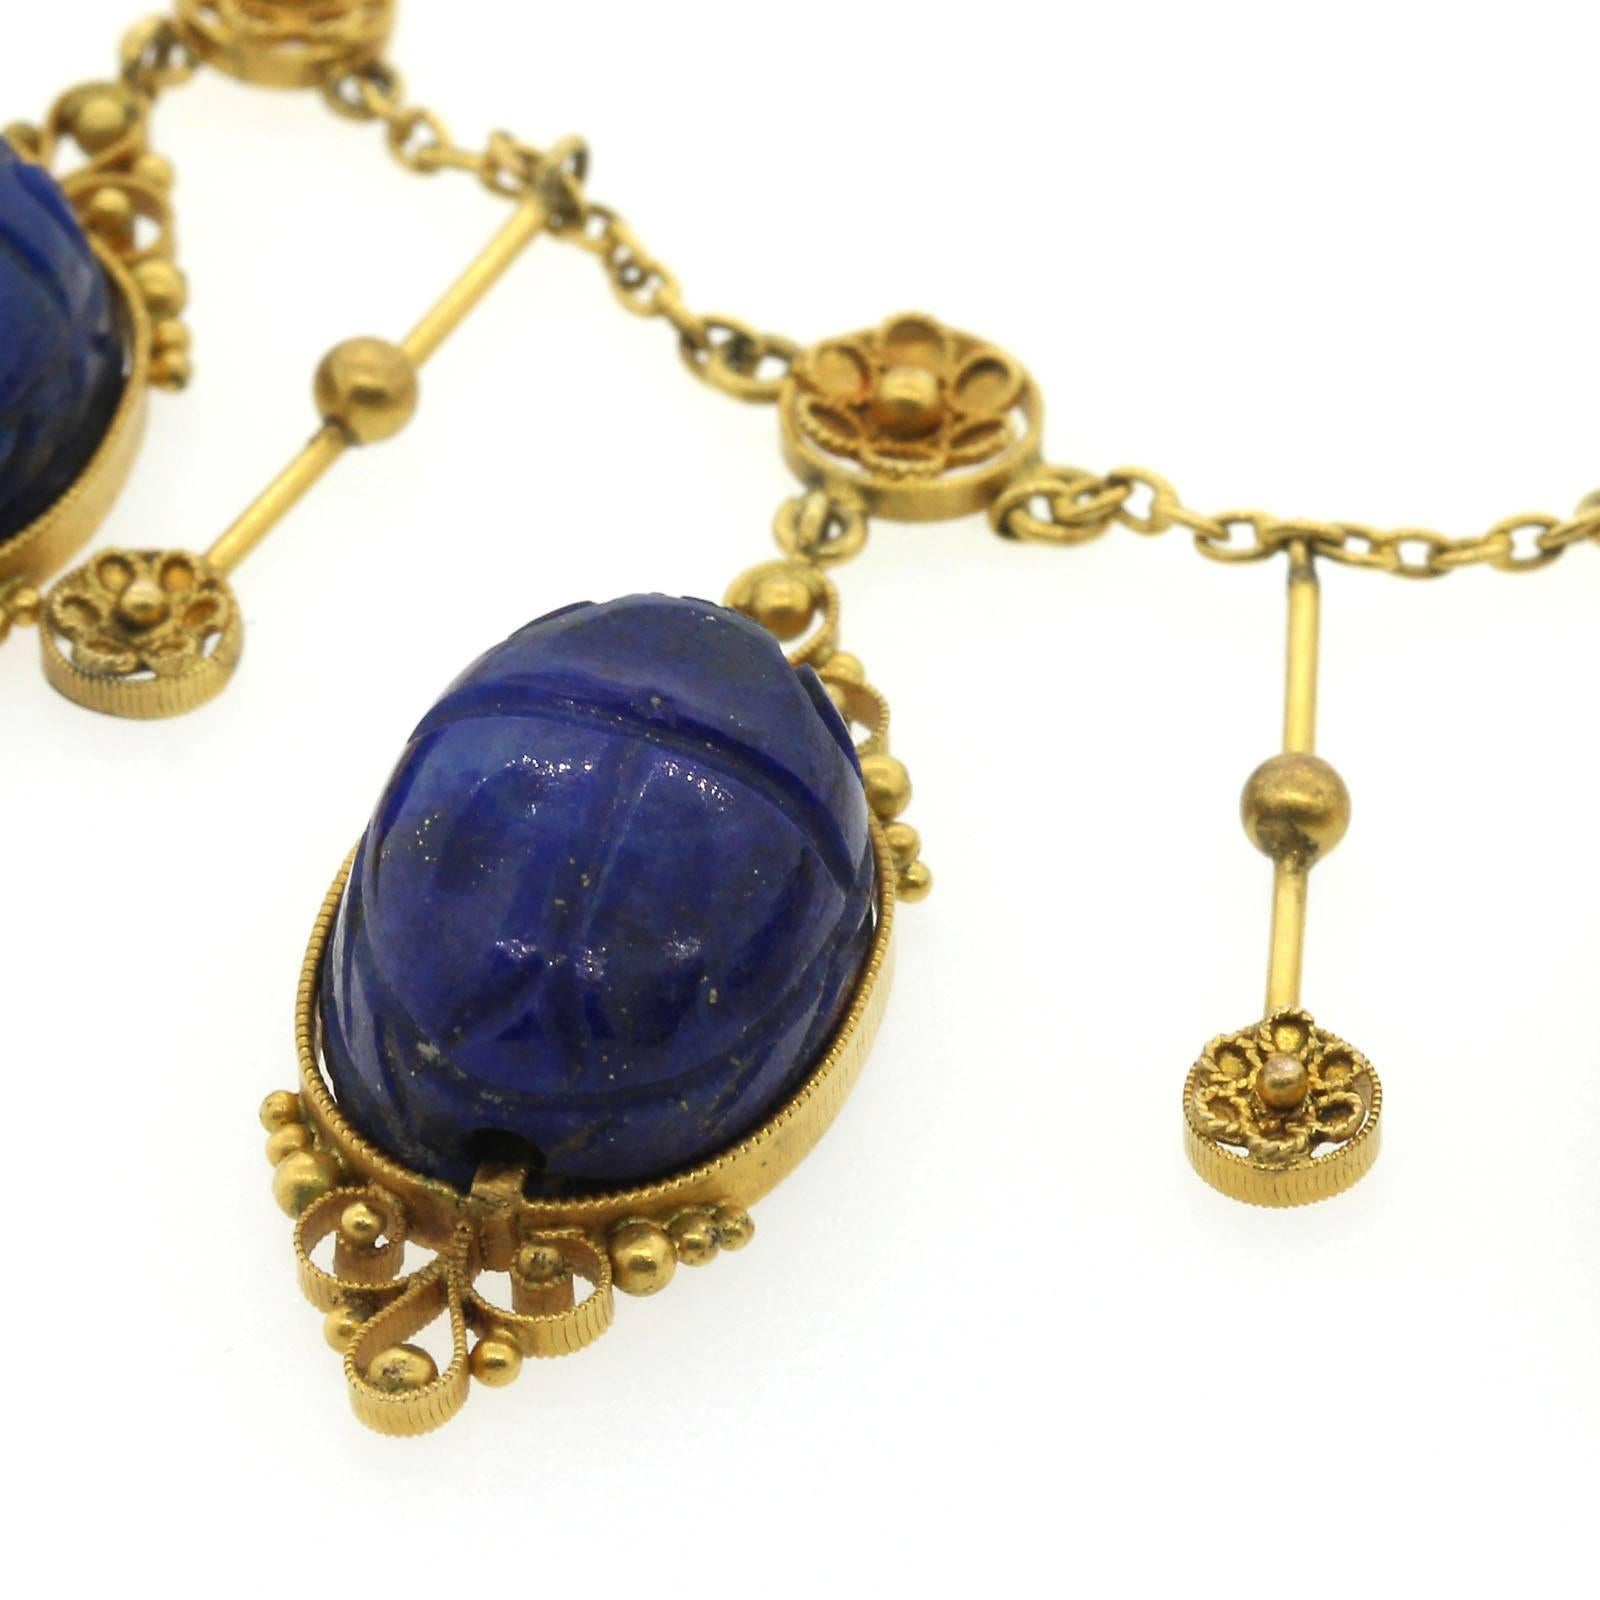 Awe inspiring Egyptian Revival  hand carved Lapis Lazuli scarab necklace.  The necklace is created with nine scarabs each hand carved on the top and each back is perfectly detailed with Egyptian hieroglyphic symbols that adds a surprising touch. 